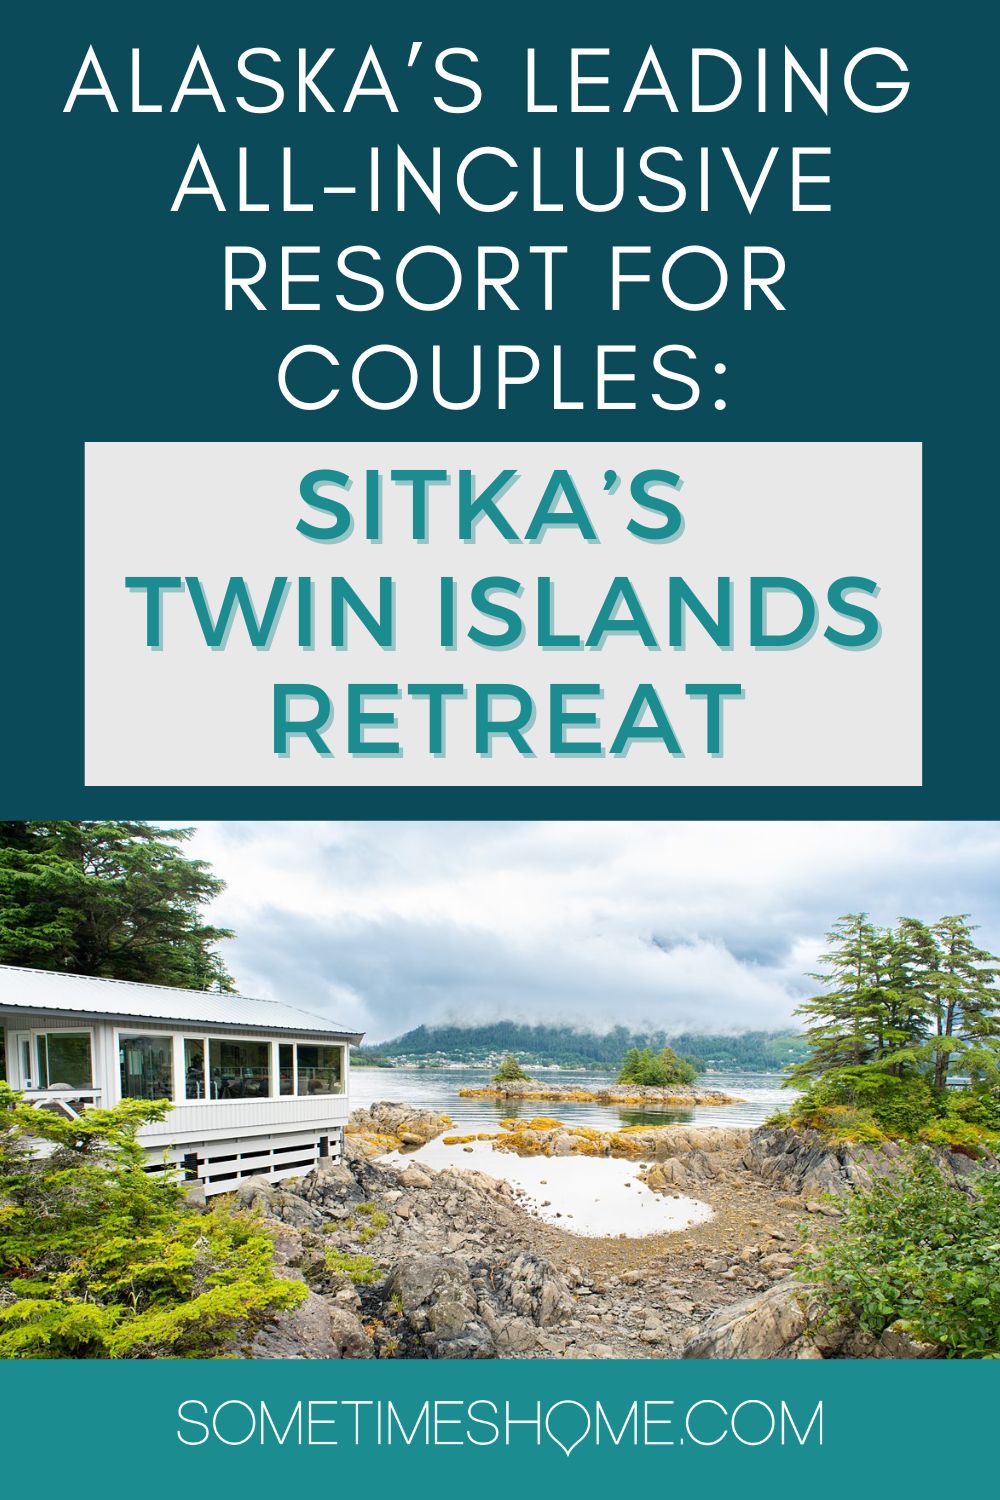 Alaska's leading all-inclusive resort for couples: Sitka's Twin Islands Retreat, with a photo of the picturesque resort.